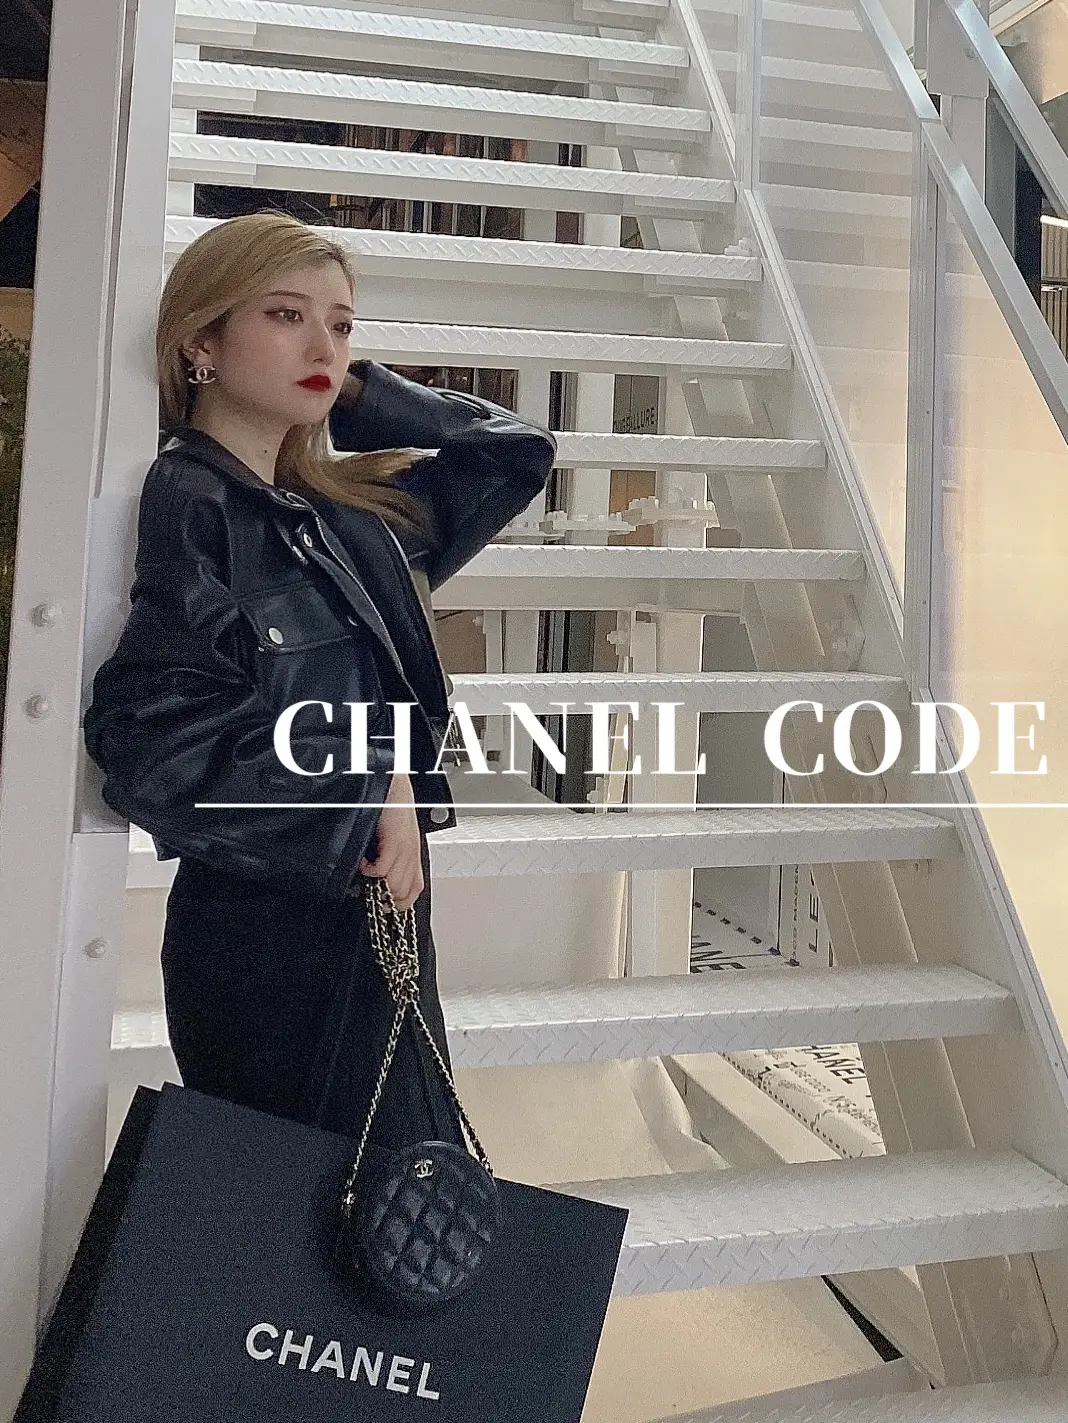 ⚫【 CHANEL 】 All Black ⚫, Gallery posted by AOI